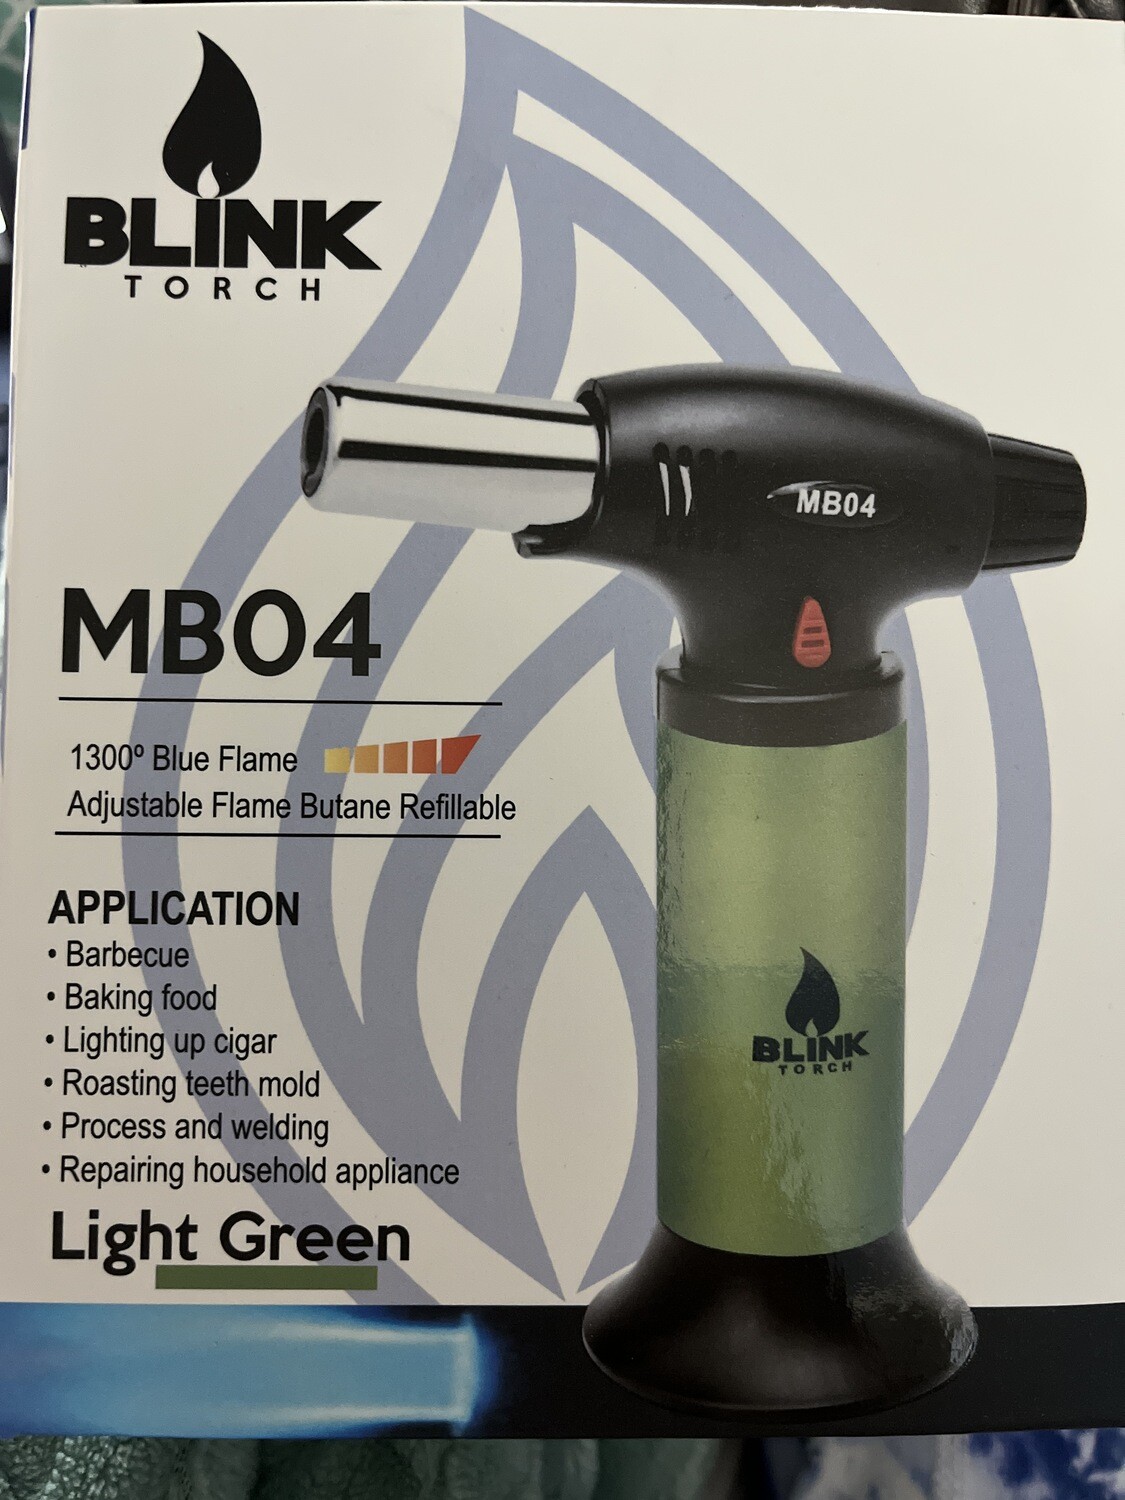 Blink Torch MB04